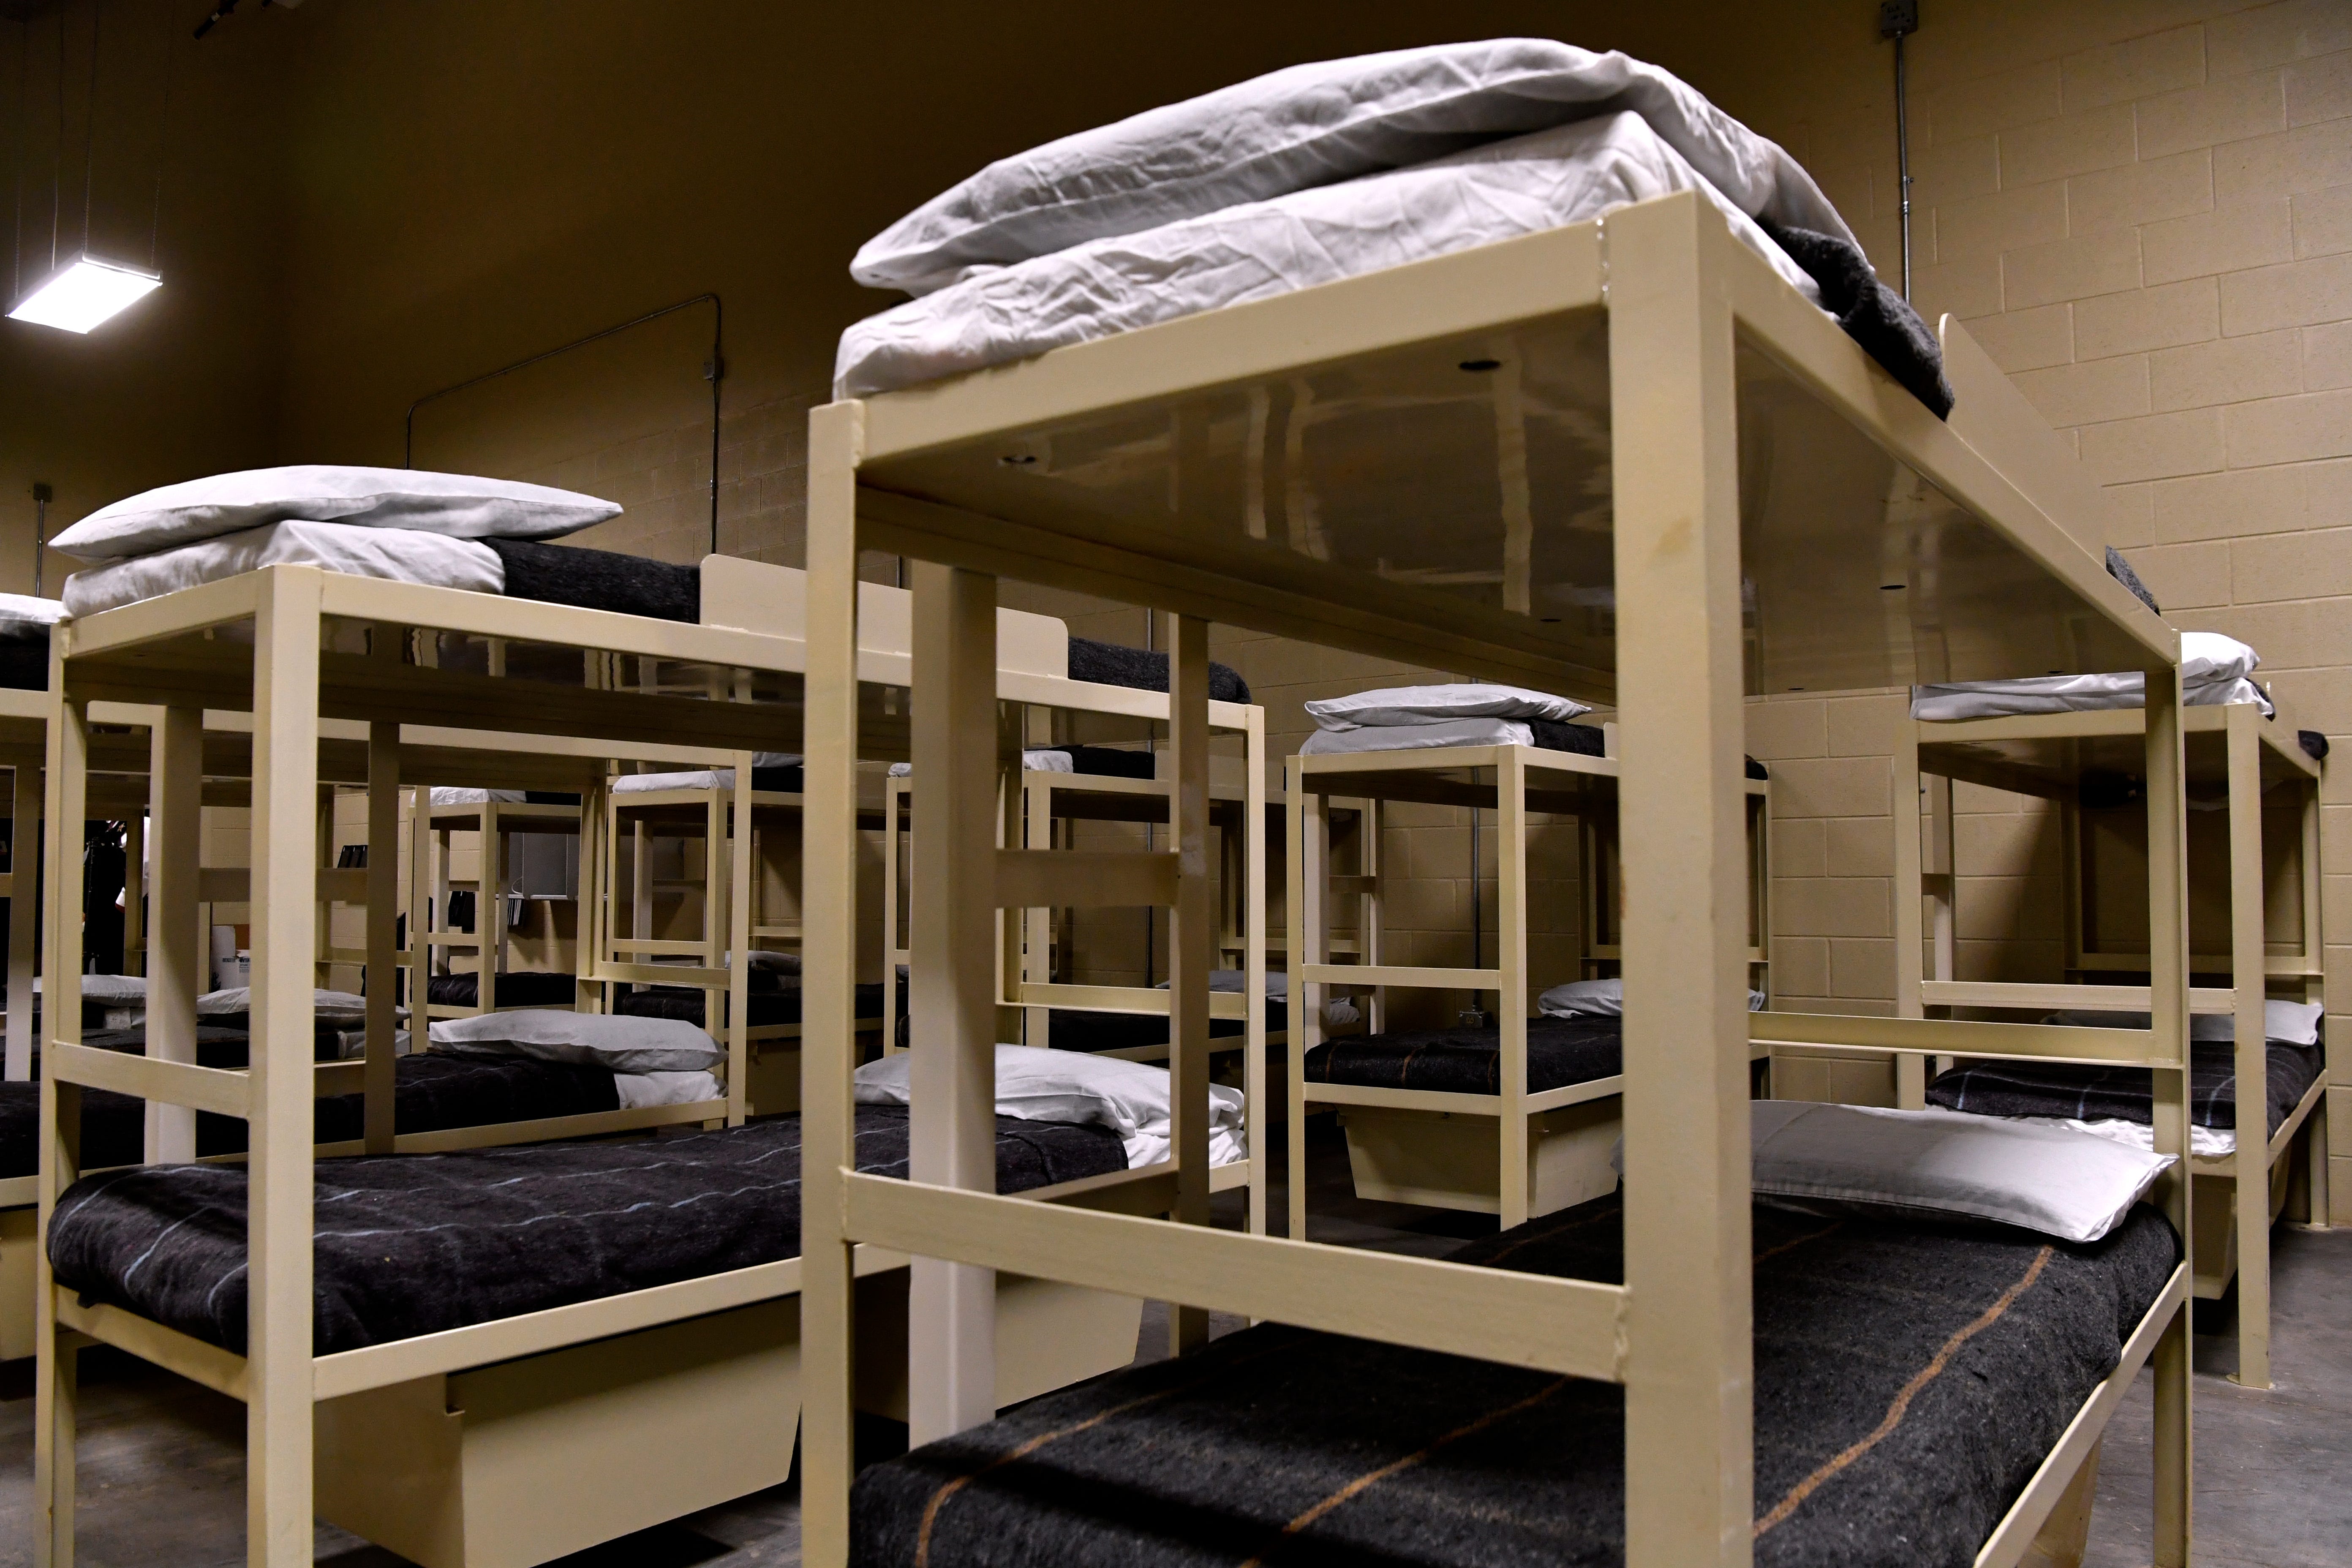 Empty bunkbeds await detainees at the U.S. Immigration and Customs Enforcement's (ICE) newest detention facility in Anson, Texas. Called the Bluebonnet Detention Center (BBDC), it can accommodate up to 1,000 ICE detainees.